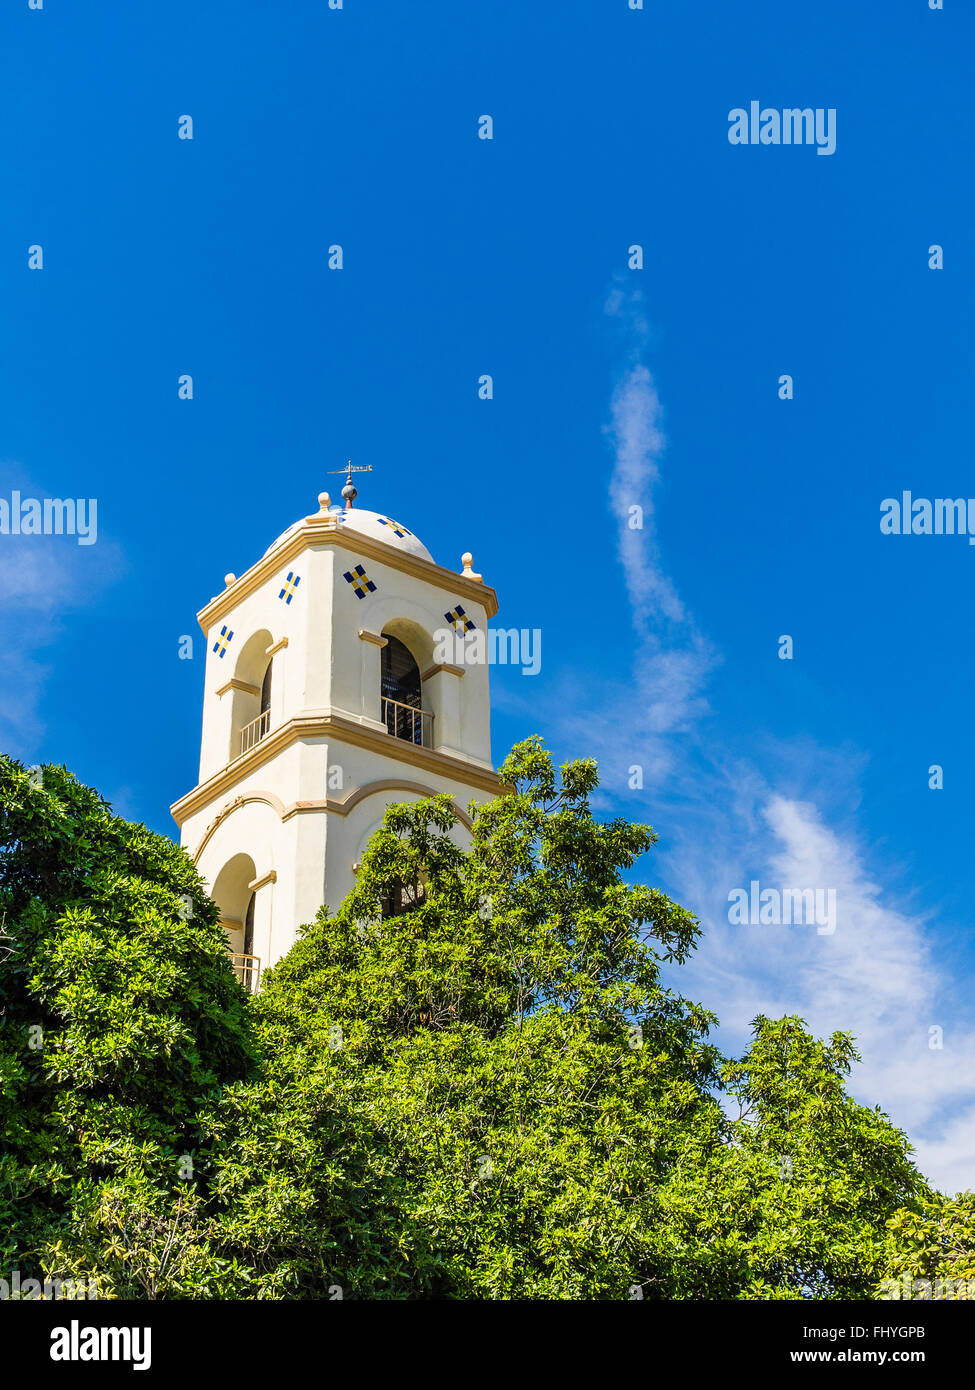 The historic colonial revival style Post Office Bell Tower, city historical landmark number 6 in Ojai, California. Stock Photo